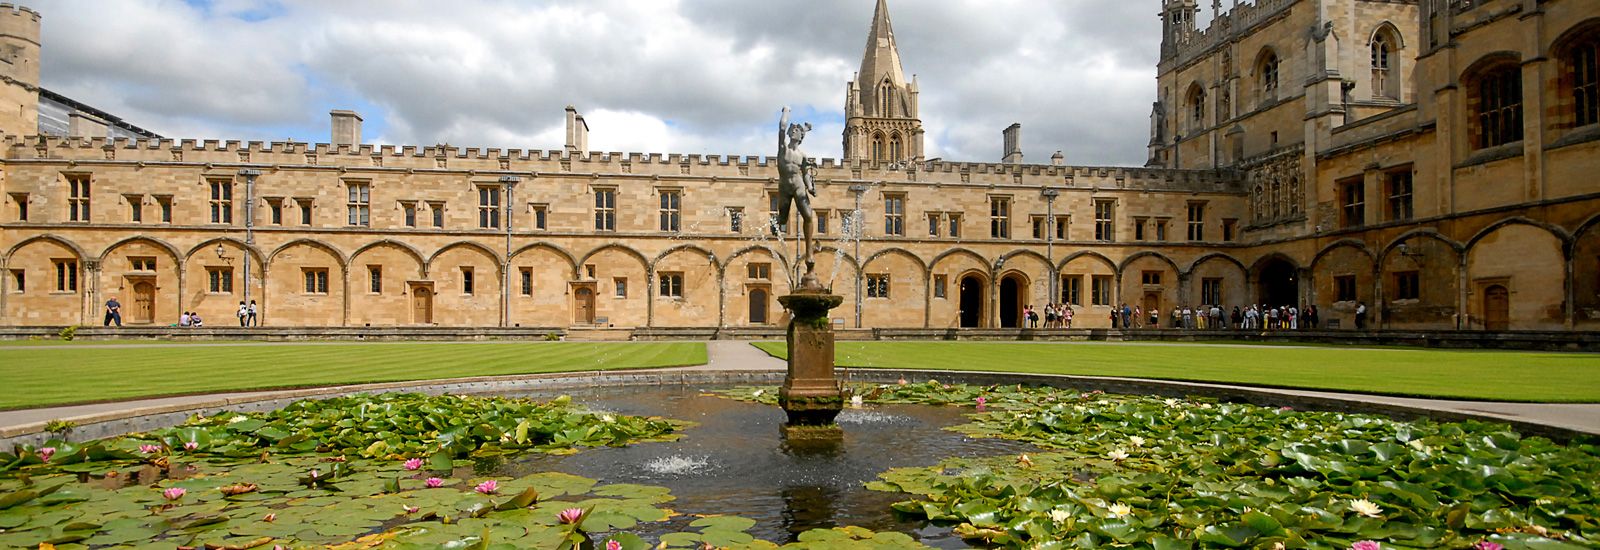 Fountain and pond in the main quad of Christ Church